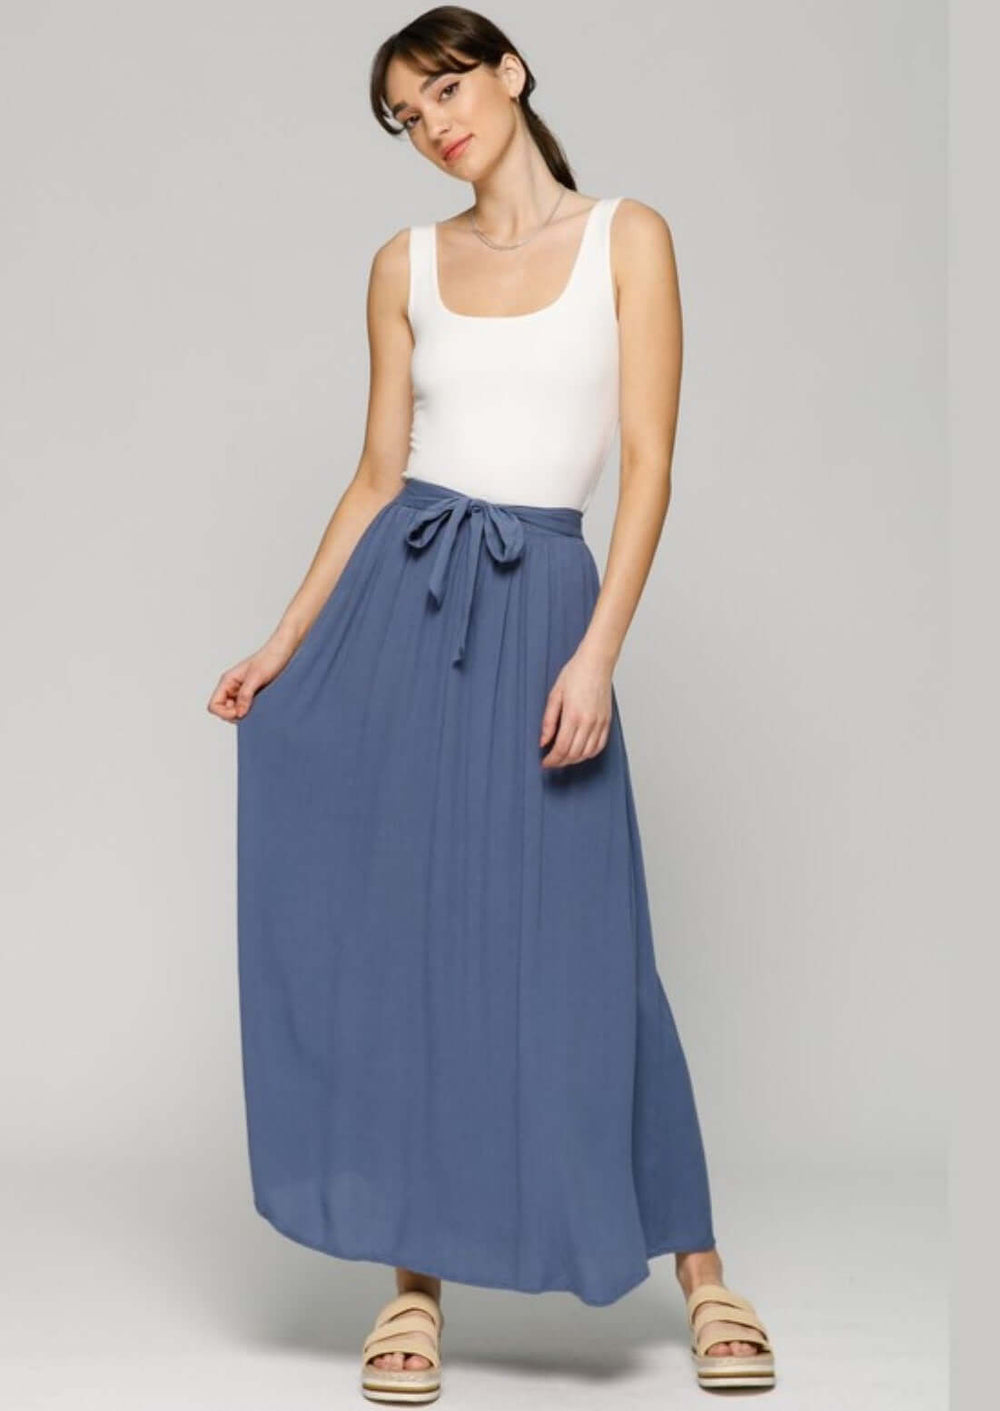 Ladies USA Made Rayon Gauze Steel Blue Tie Front Maxi Skirt | Brand: Final Touch Style# S80065C | Classy Cozy Cool Women's Made in America Boutique